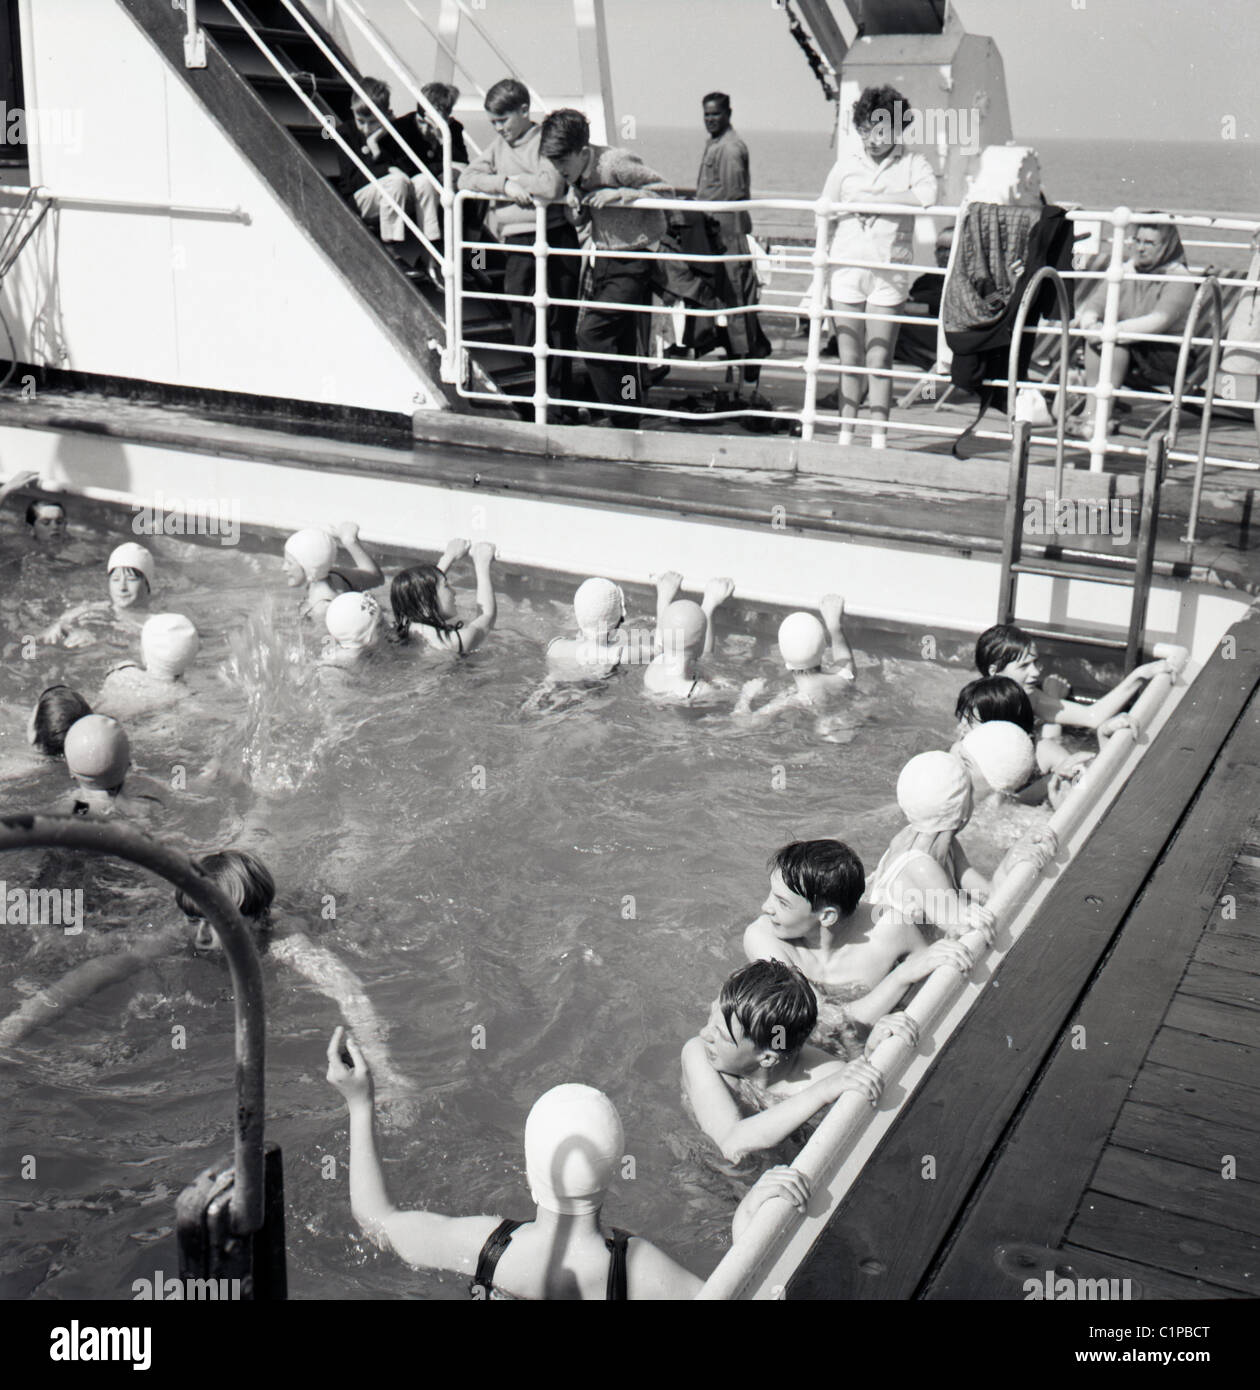 British India cruise liner, 1950s. Passengers on board the ship enjoy a swim in the open pool. Stock Photo